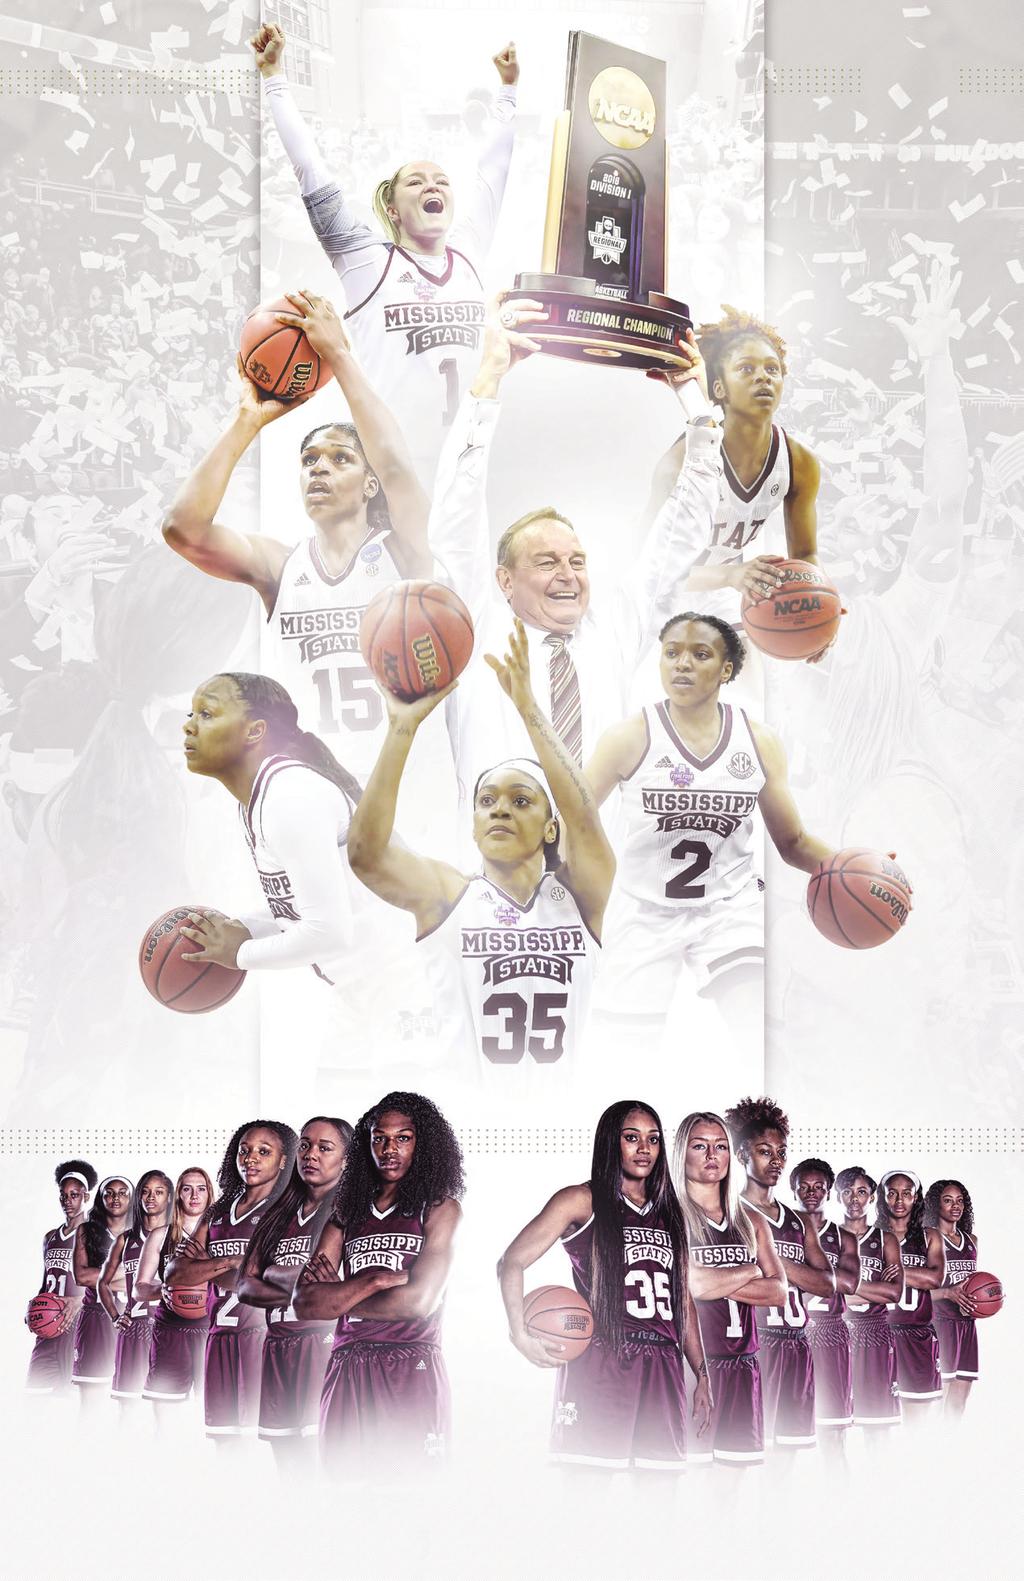 2017 & 2018 SEC CHAMPIONS 2017 & 2018 REGIONAL CHAMPIONS MISSISSIPPI STATE BULLDOGS WOMEN S BASKETBALL GAME NOTES HAILSTATE.COM @HAILSTATEWBK SCHEDULE/RESULTS OVERALL RECORD... 37-2 SEC.